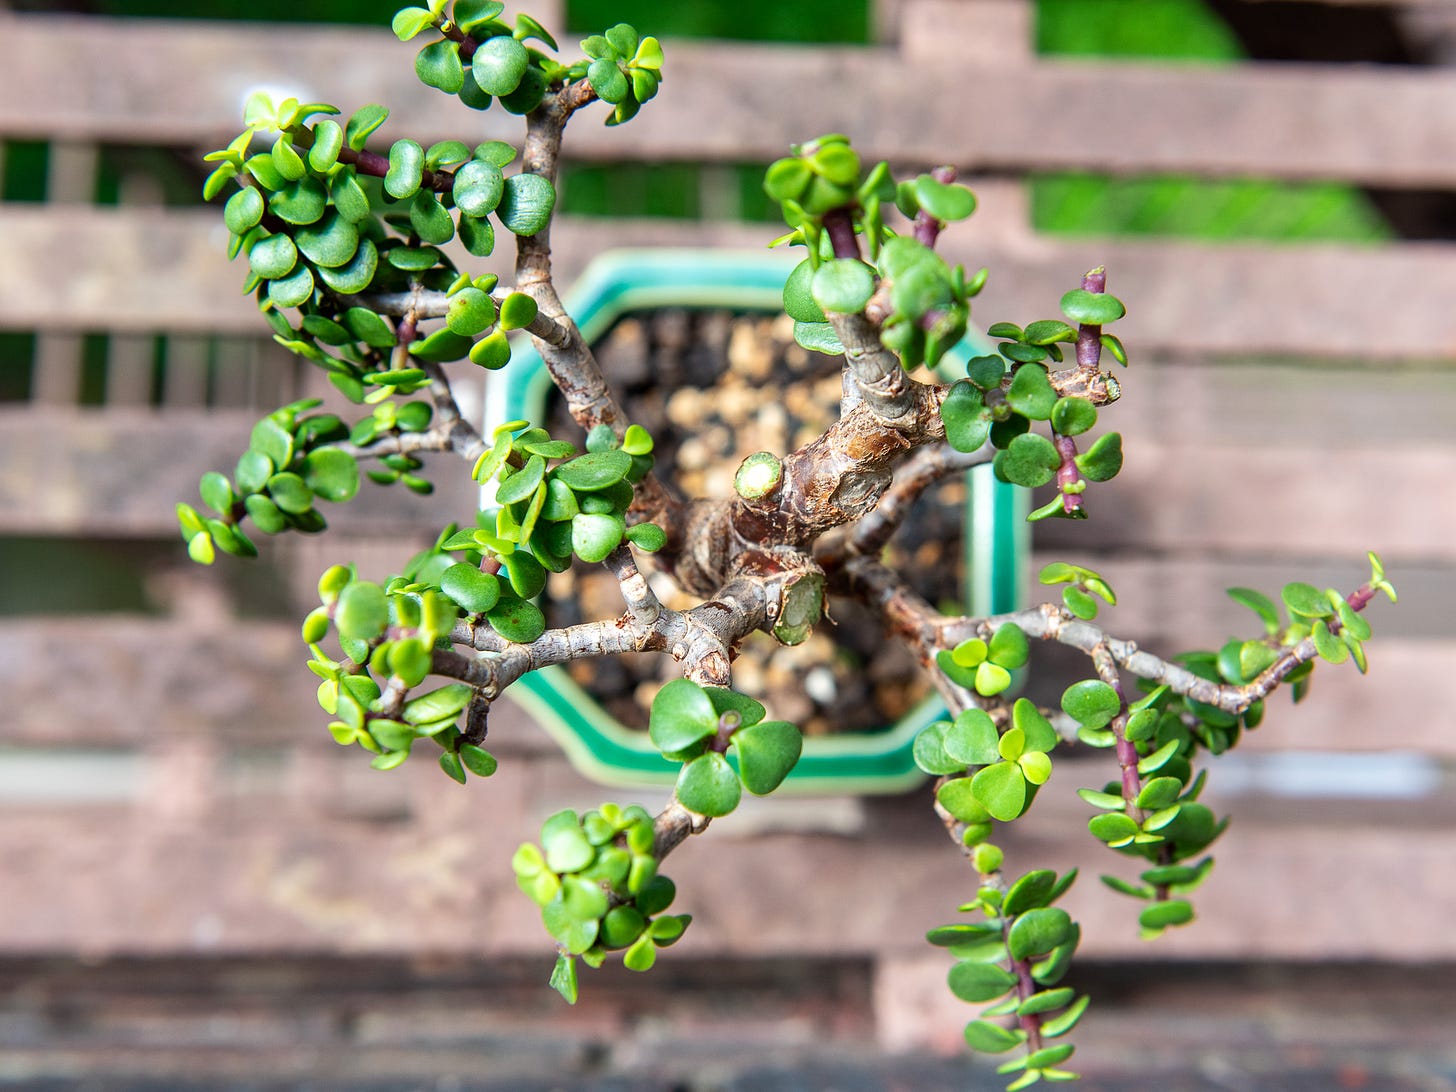 ID: Pruned portulacaria afra bonsai, viewed from above